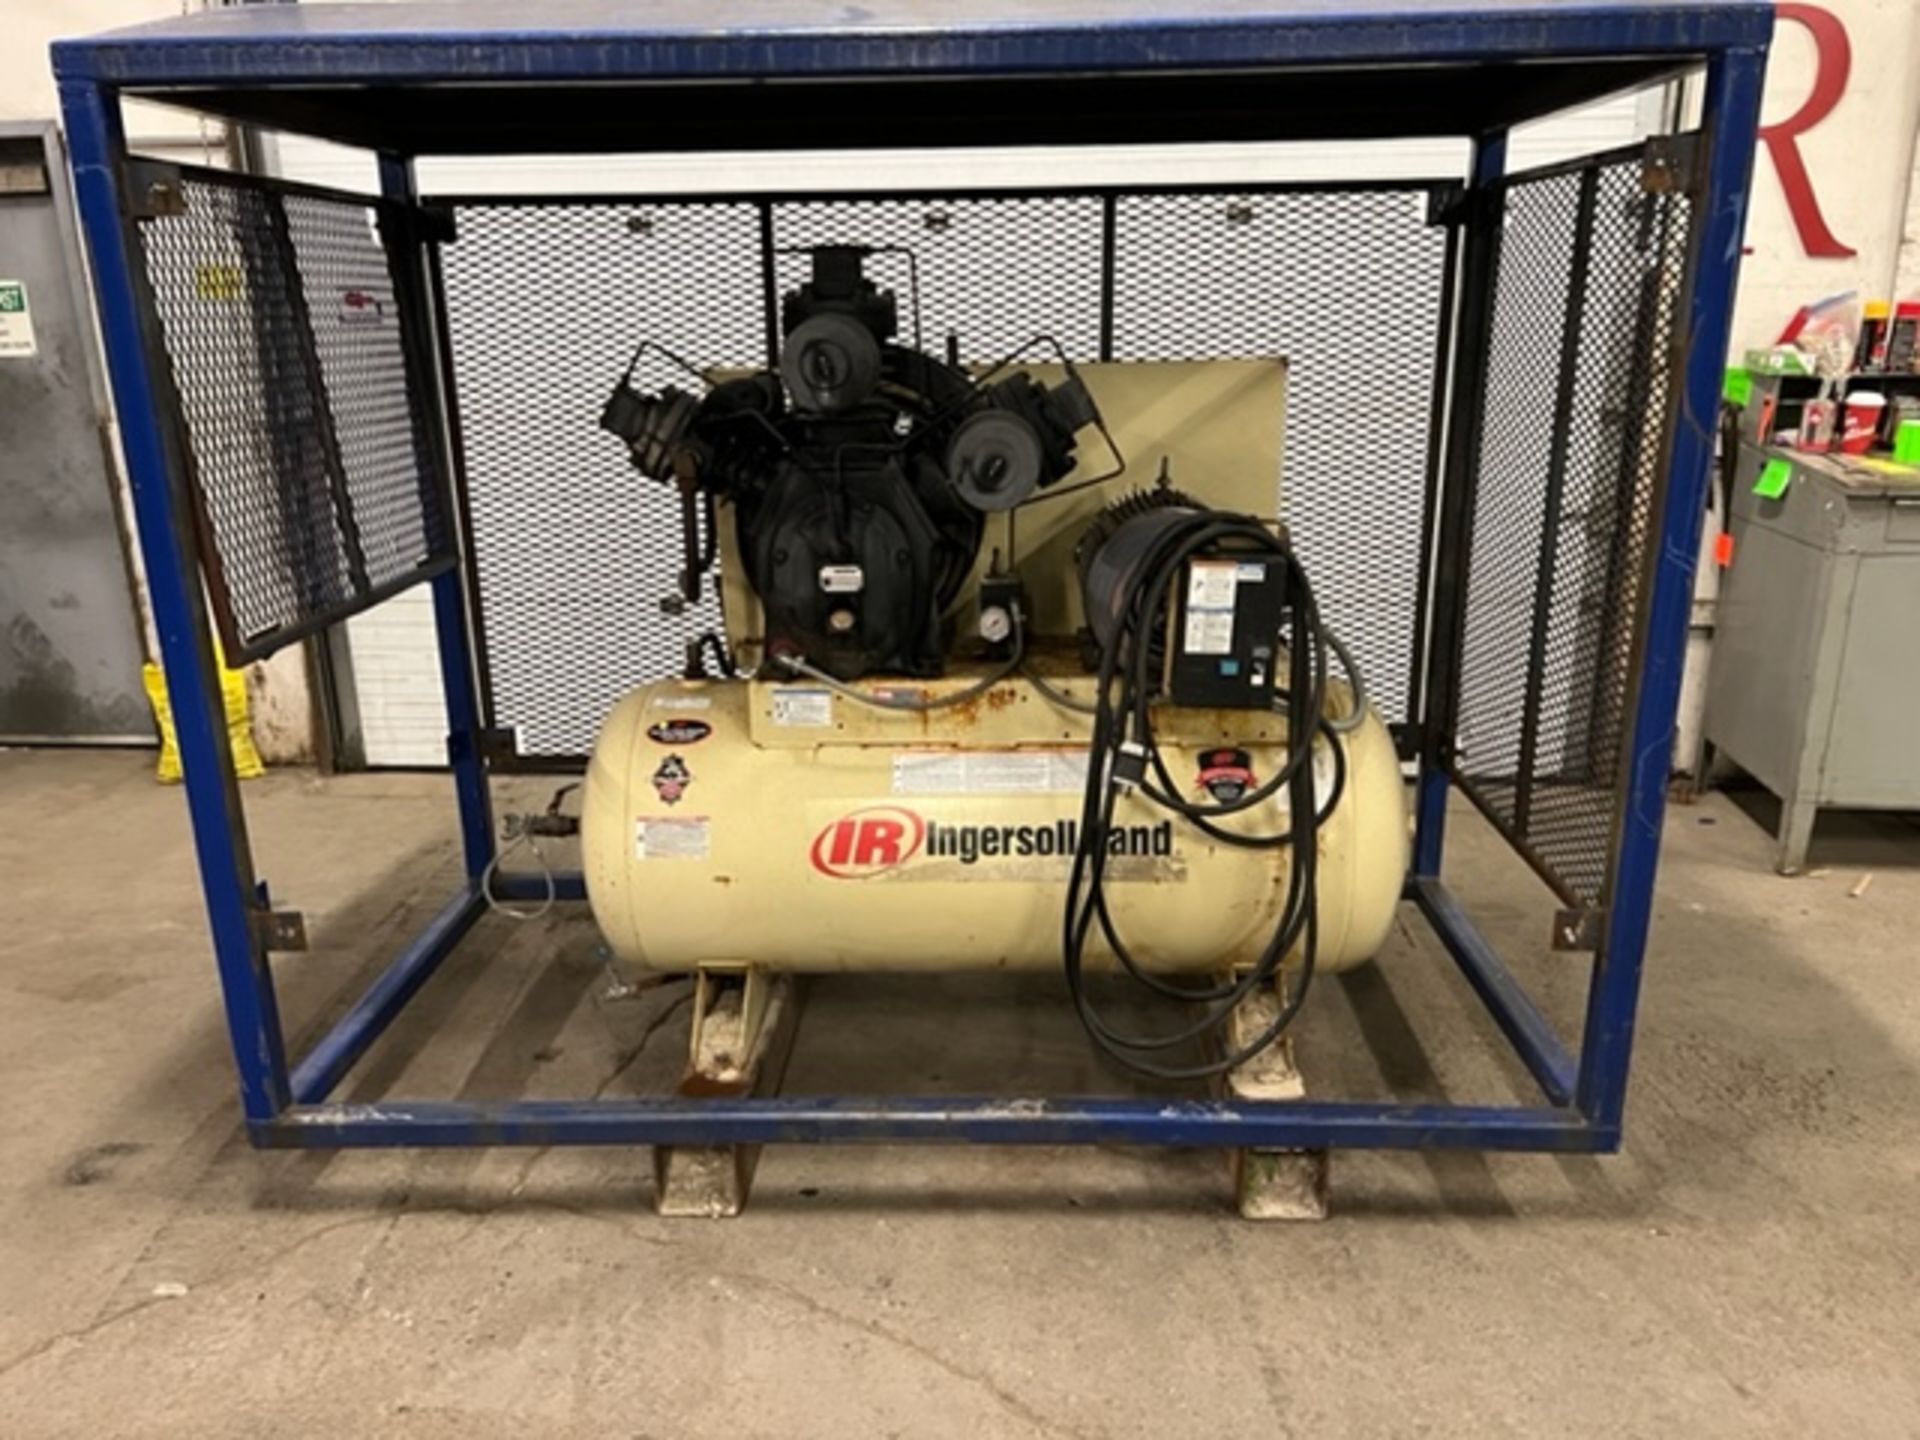 Ingersoll Rand model 20HP Air Compressor with Soft Start with horizontal compressed air tank with